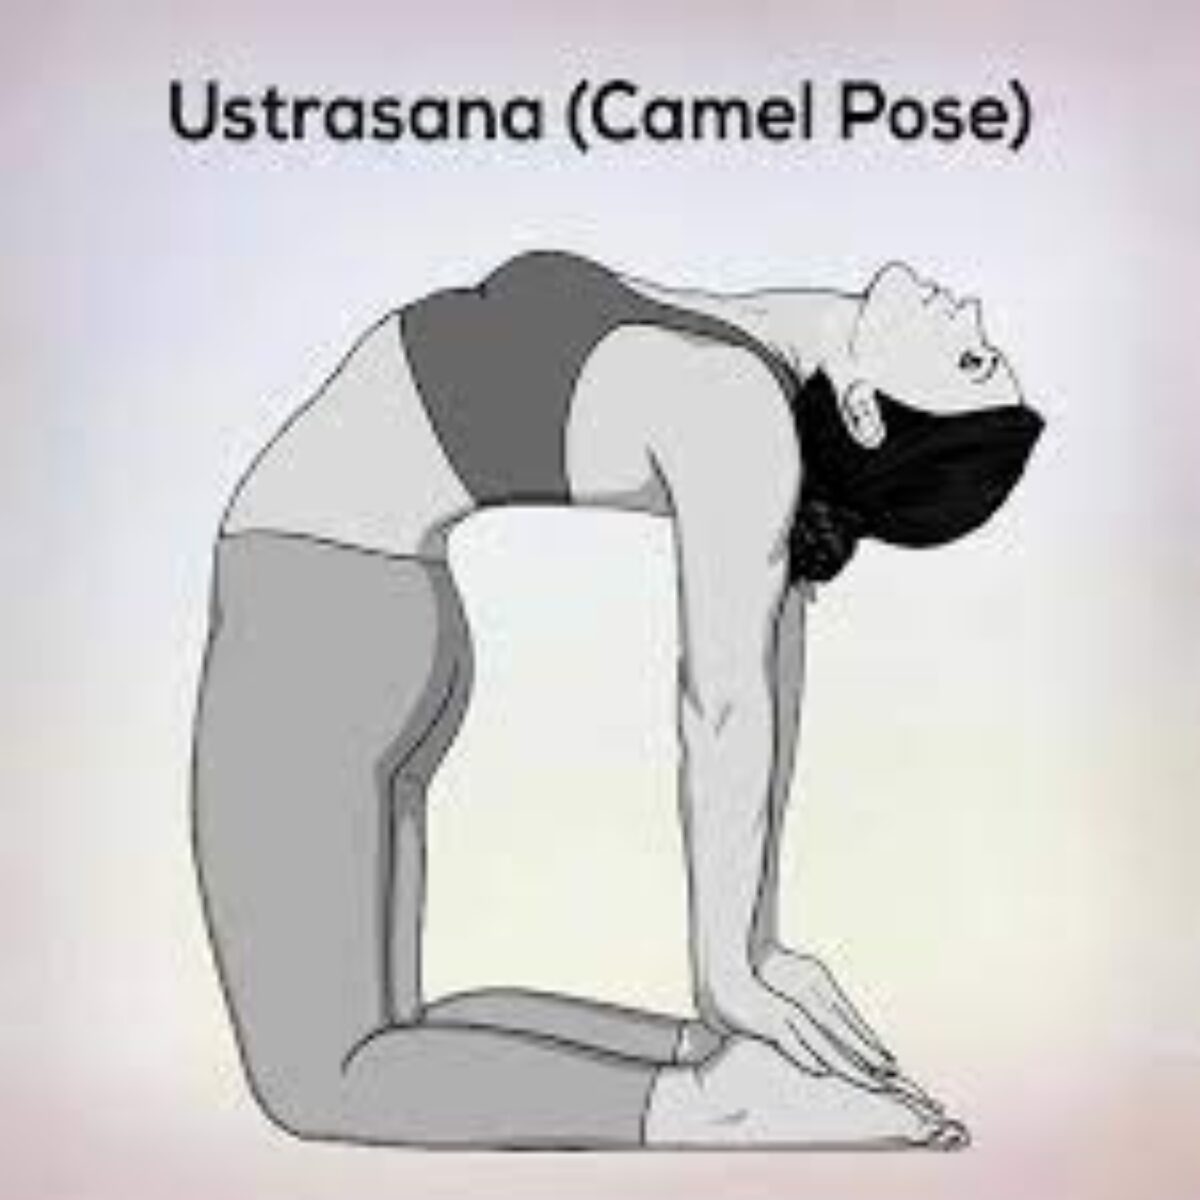 Ustrasana Using: the Camel's Strength for Physical and Spiritual Mastery